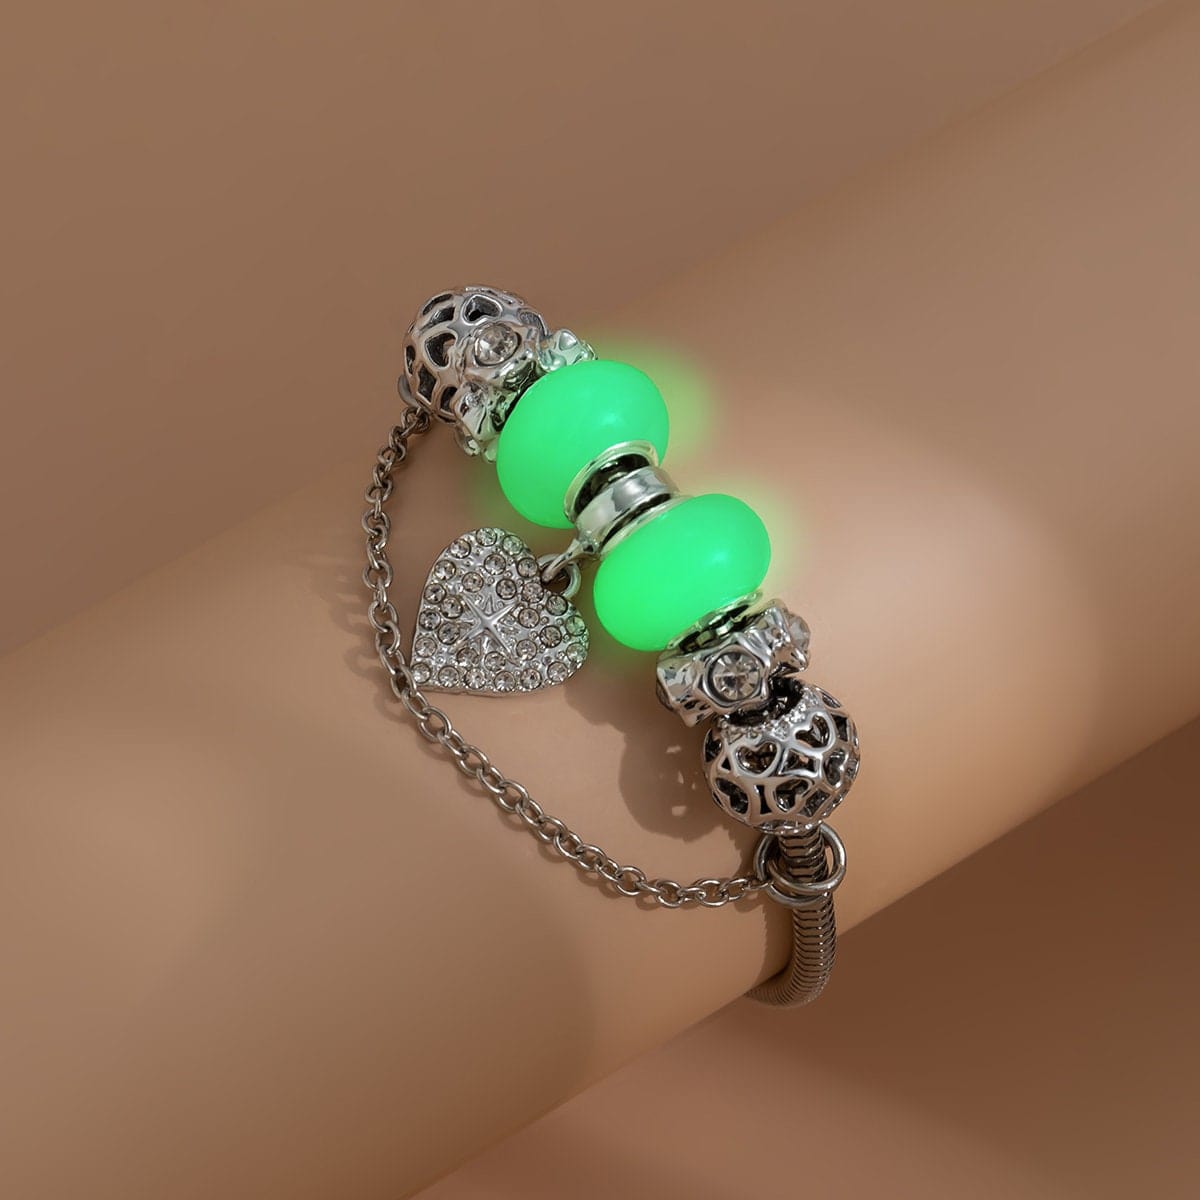 Luxury Designer Silver Plated Teddy Bear Green Charm Bracelet With Green  Crystal Pendant And Beaded Box Set For Pandora DIY From Pandora_home, $9.93  | DHgate.Com